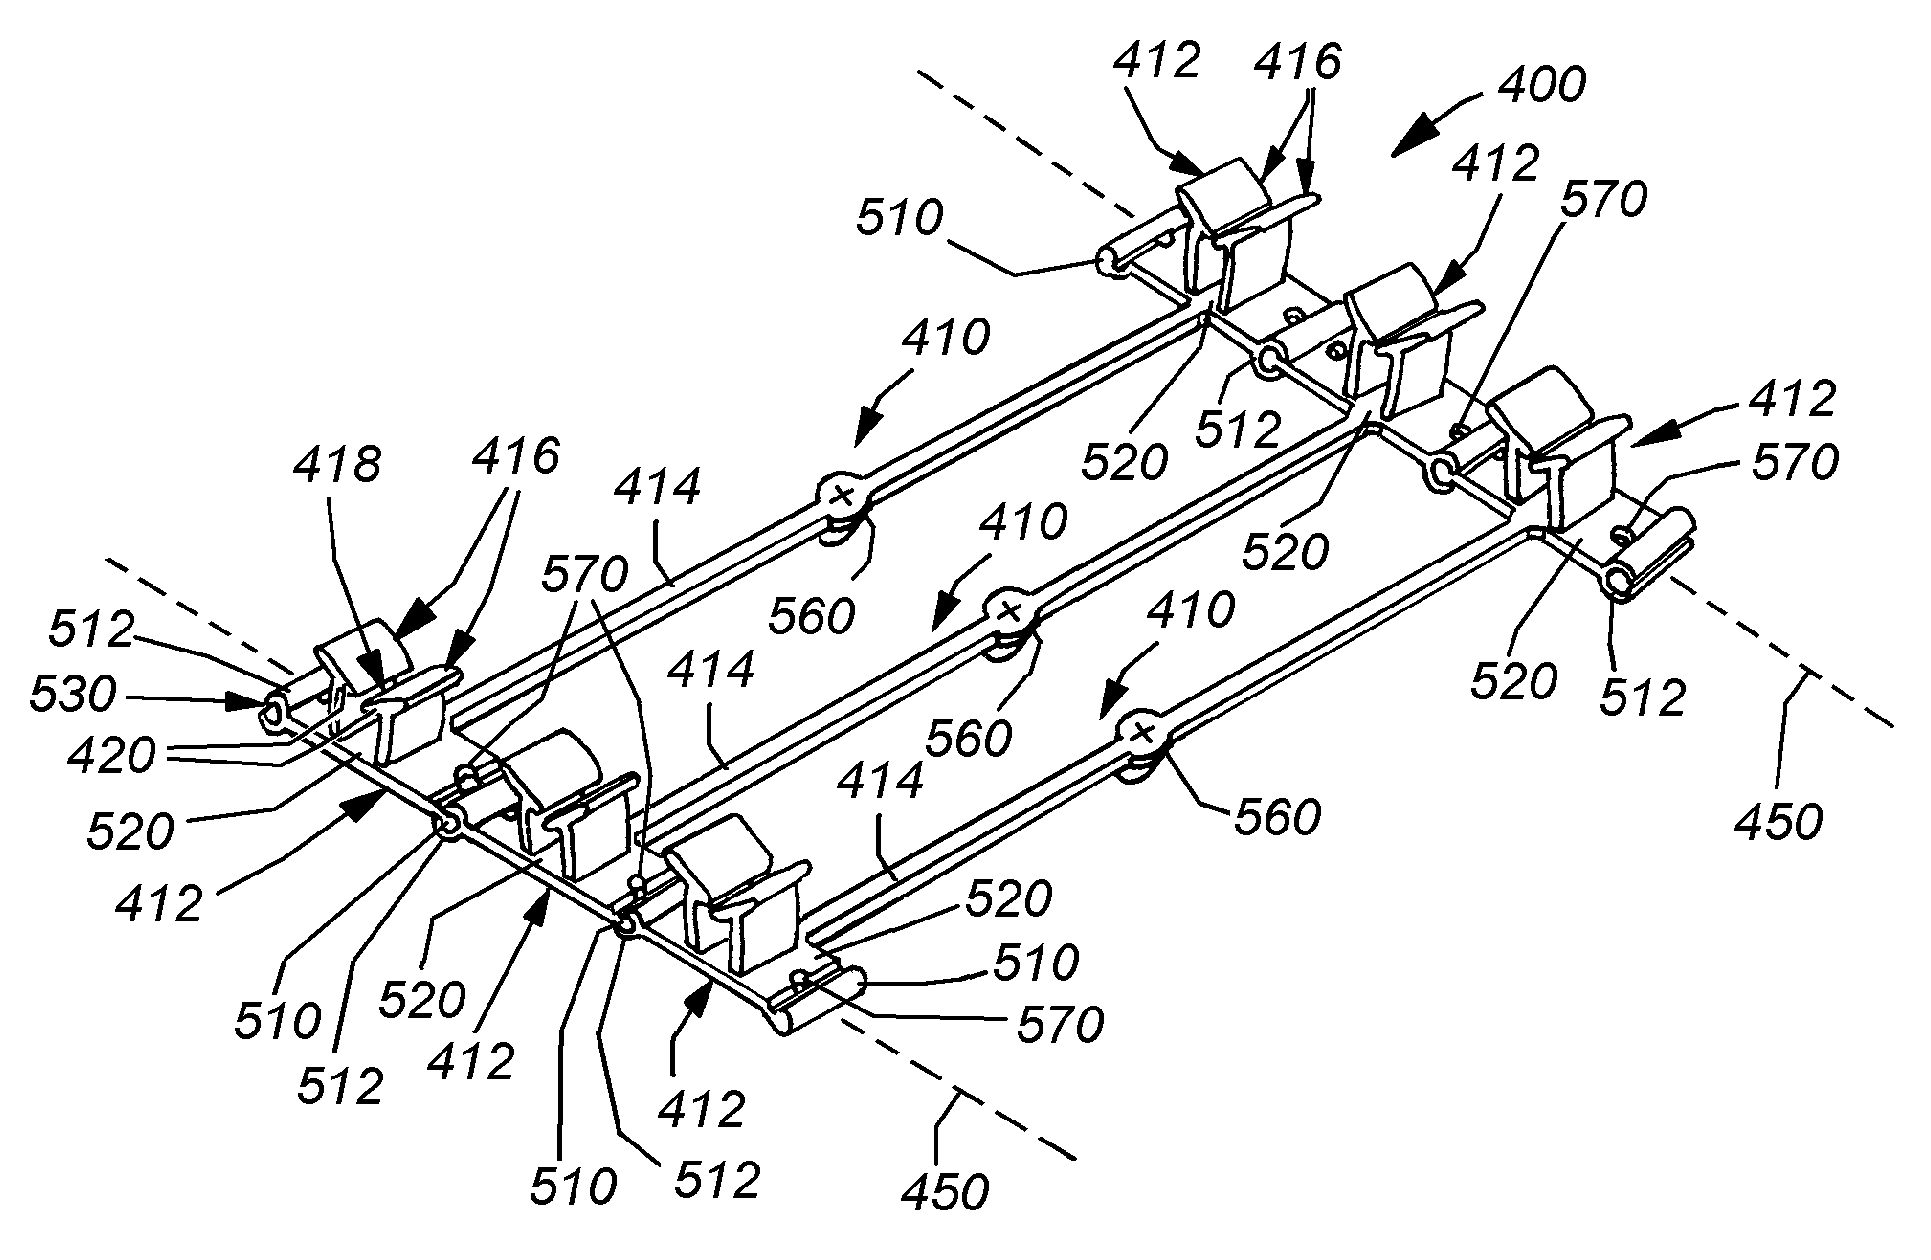 Festooned trim clip system and method for attaching festooned clips to a substrate